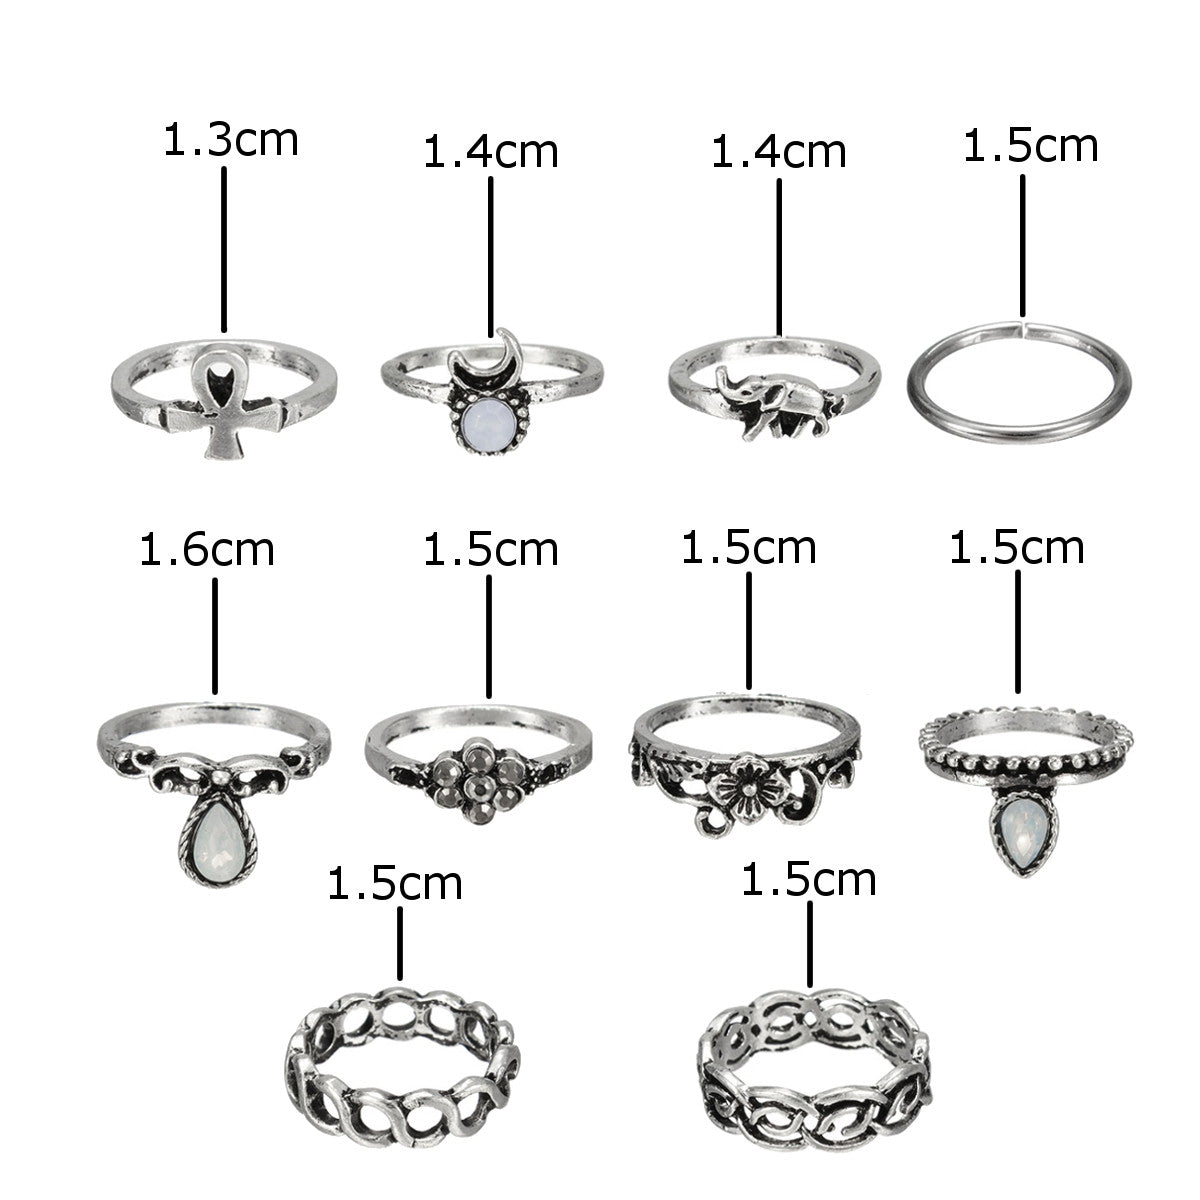 10pcs Vintage Knuckle Rings Tribal Ethnic Hippie Joint Punk Ring Set for Women